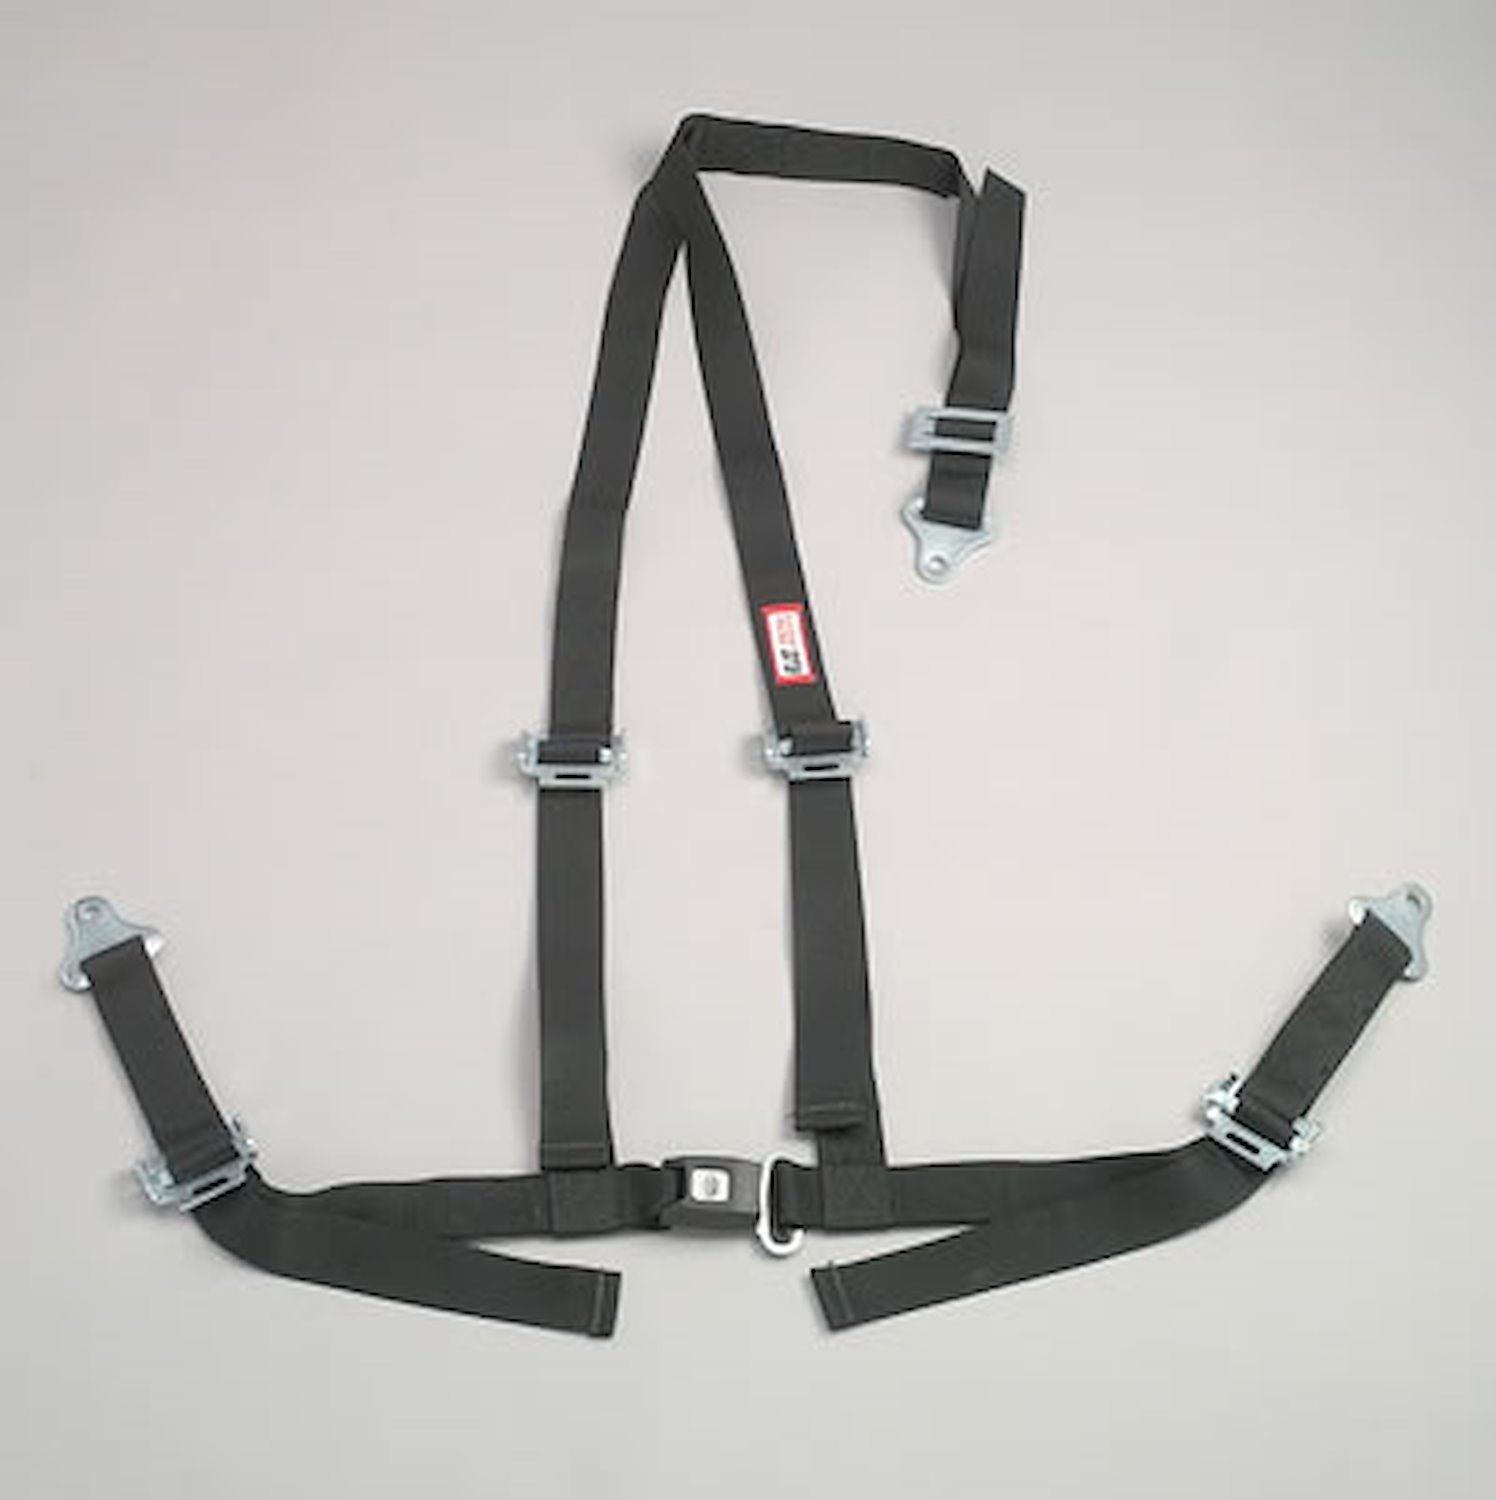 NON-SFI B&T HARNESS 2 PULL UP Lap Belt SNAP 2 S. H. Individual ROLL BAR Mount WRAP/BOLT OD GREEN